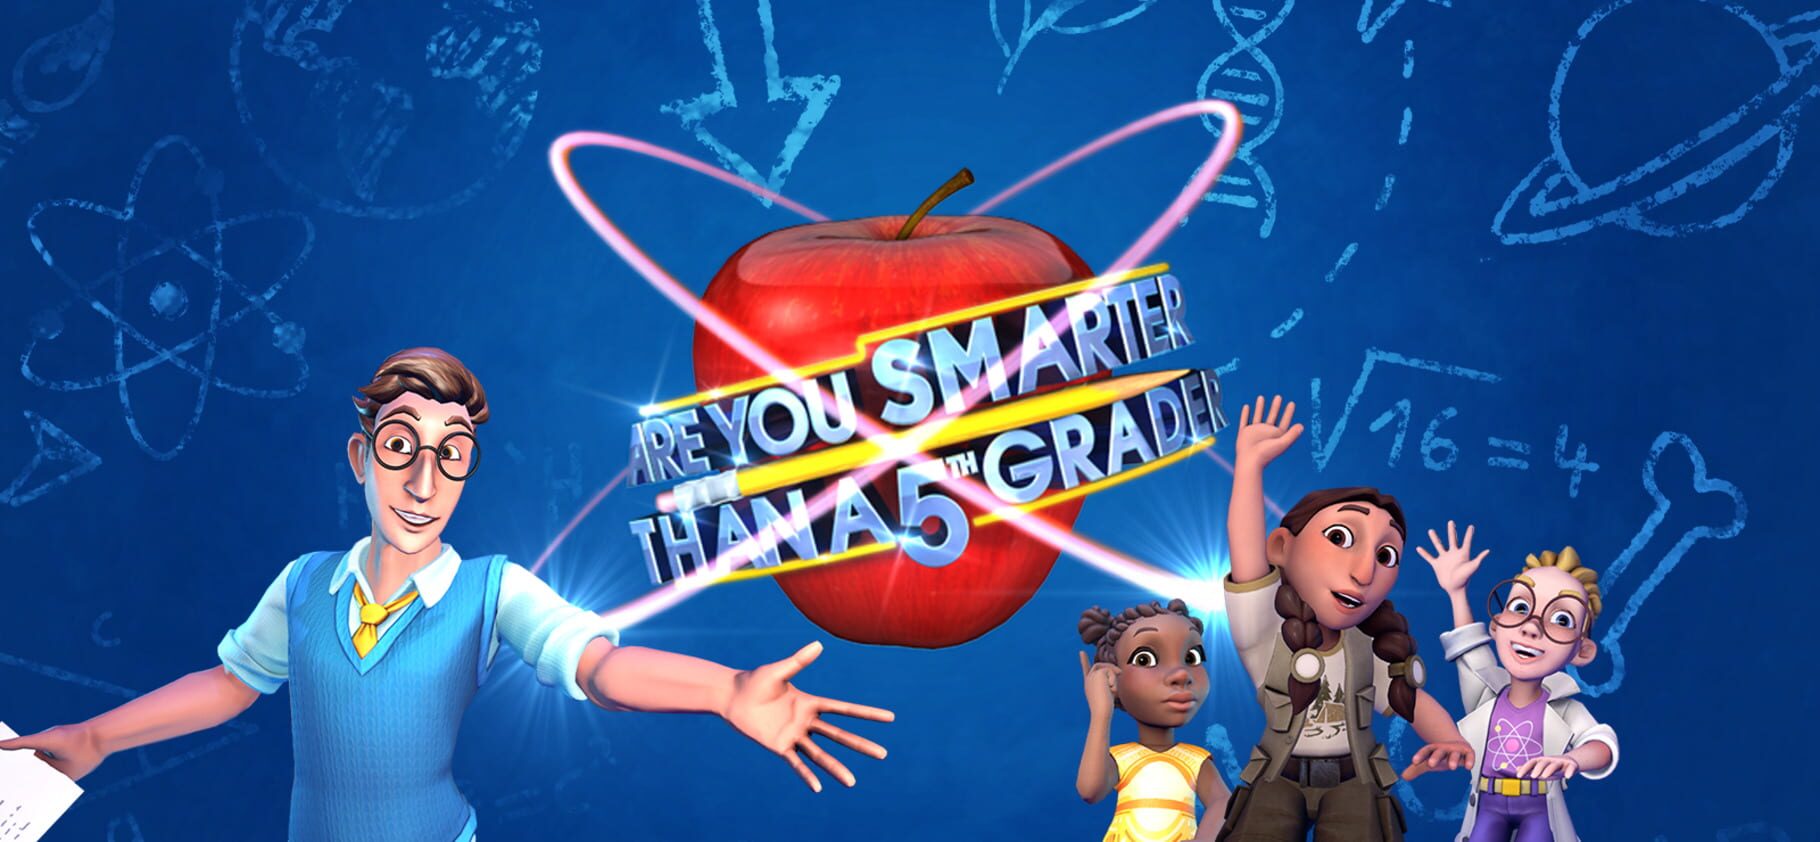 Are You Smarter than a 5th Grader? artwork